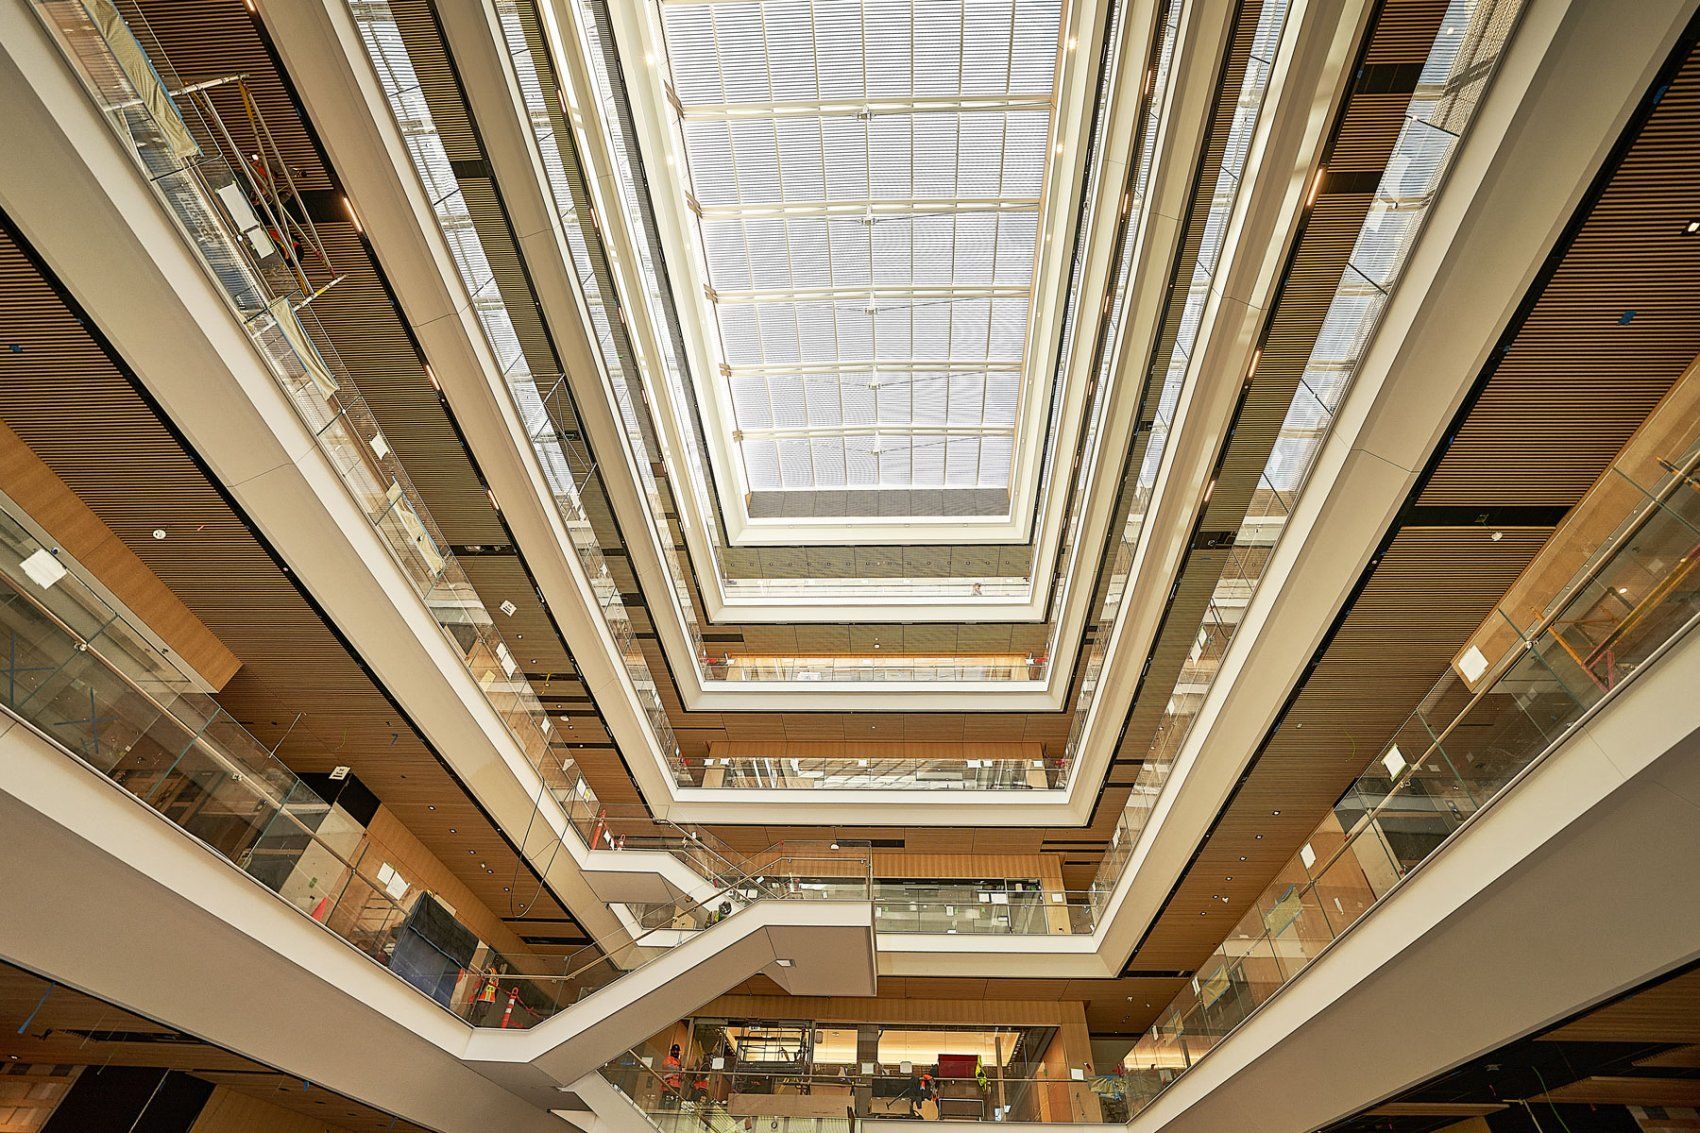 Center shot of the interior of the Weill Neurosciences Building